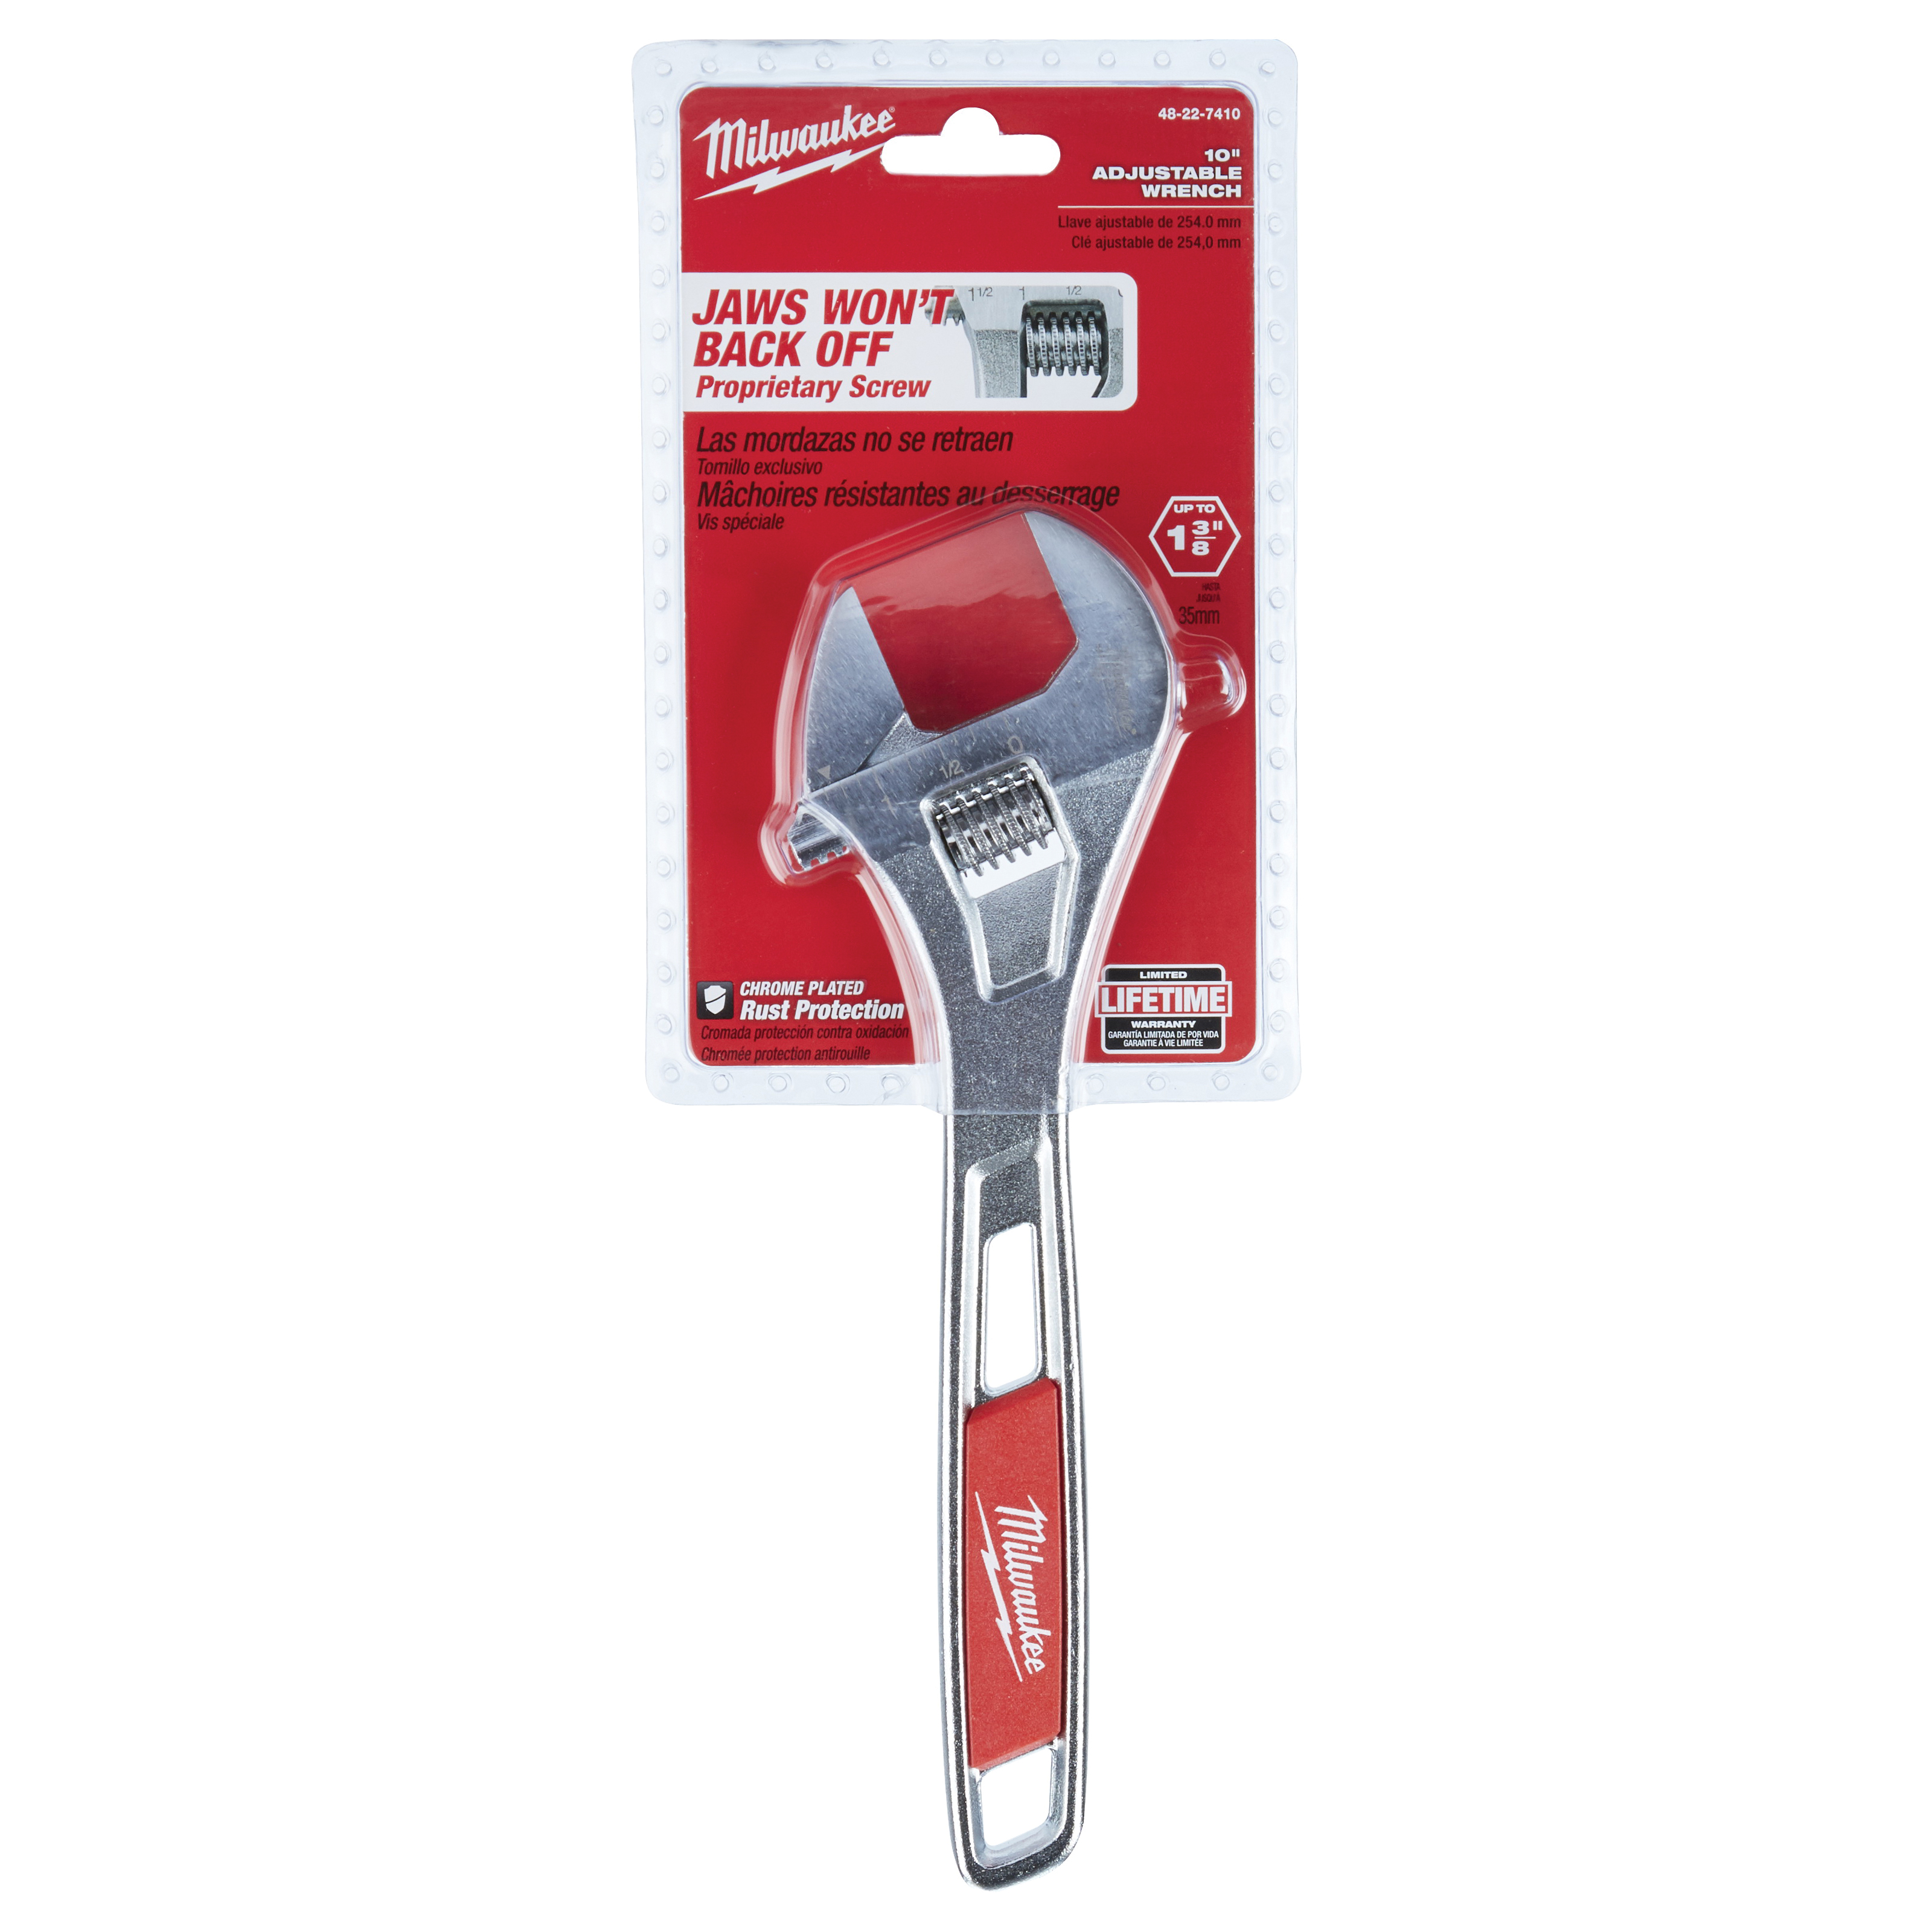 48-22-7410 Adjustable Wrench, 10 in OAL, 1-3/8 in Jaw, Steel, Chrome, Ergonomic Handle